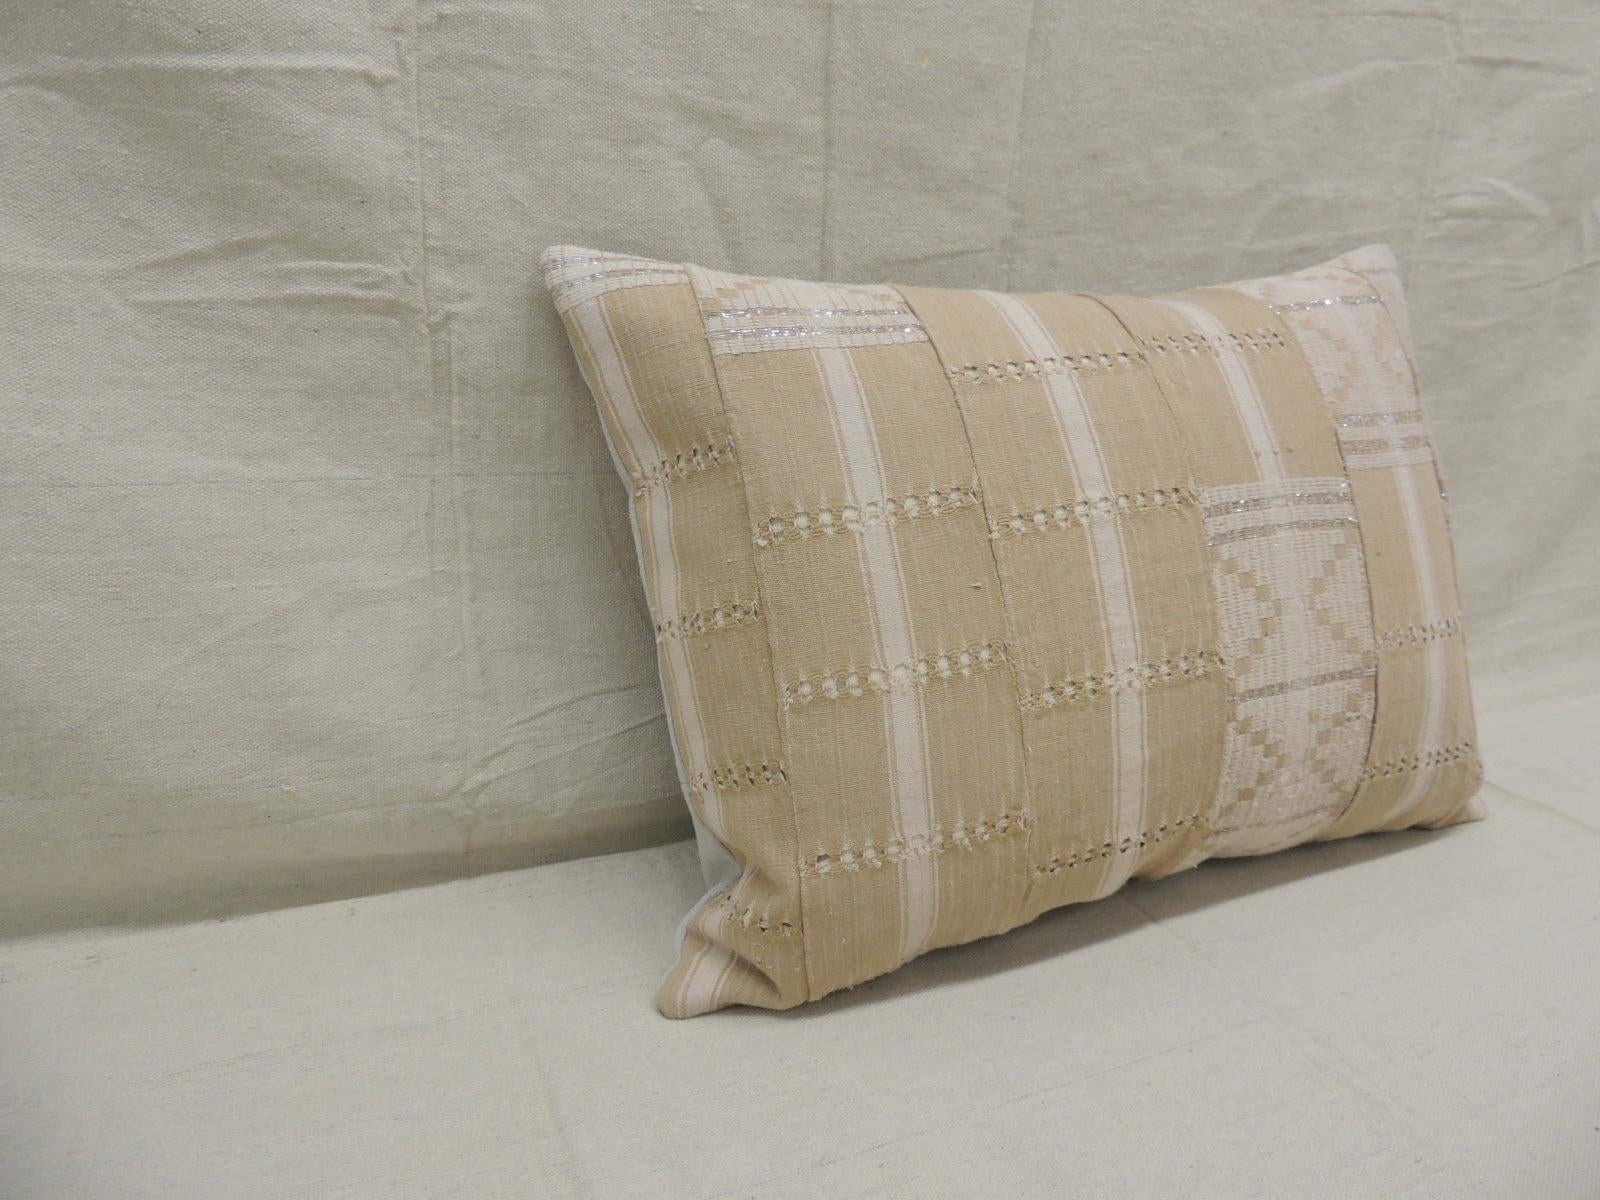 Vintage tan and brown woven ewe stripweaves and white embroidery African long bolster
decorative pillow with silver embroidered metallic threads.
With textured grey cotton backing.
Decorative pillow handcrafted and designed in the USA.
Closure